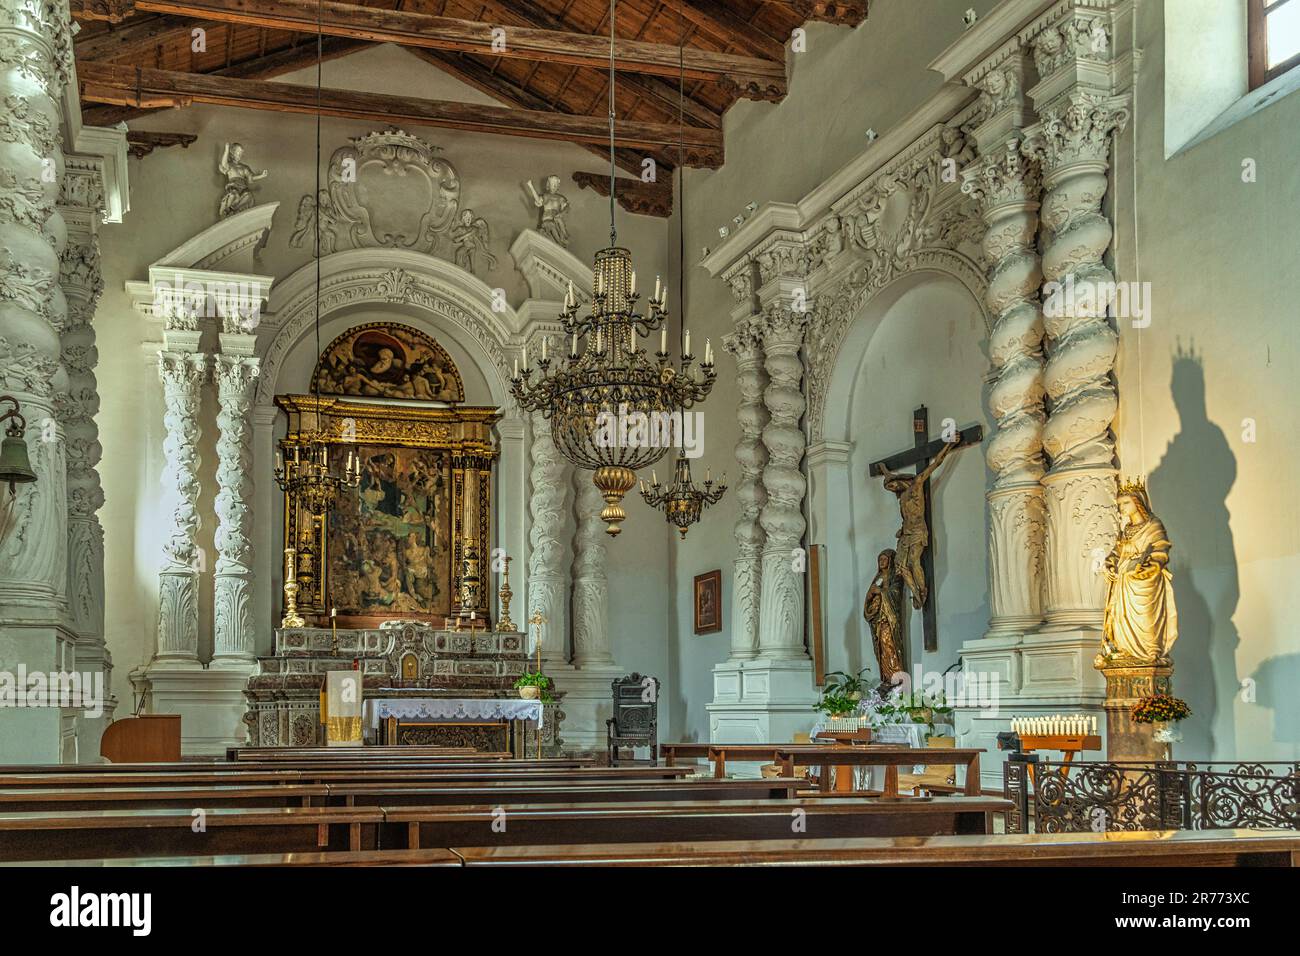 The interior of the baroque church of Santa Caterina d'Alessandria with the baroque style altar with acanthus leaves and twisted stucco columns.Sicily Stock Photo